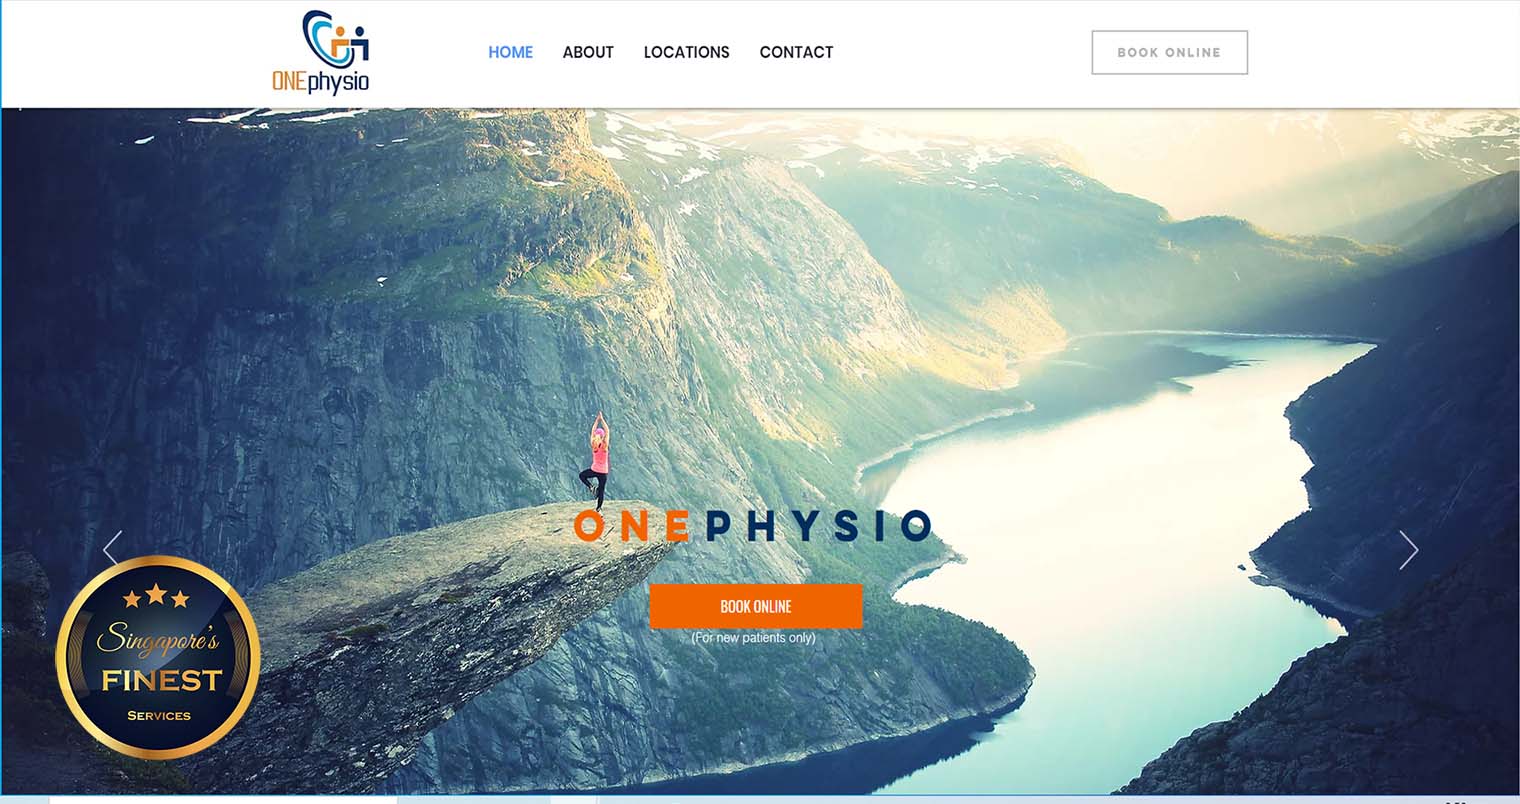 Onephysio - Physiotherapy Clinics Singapore